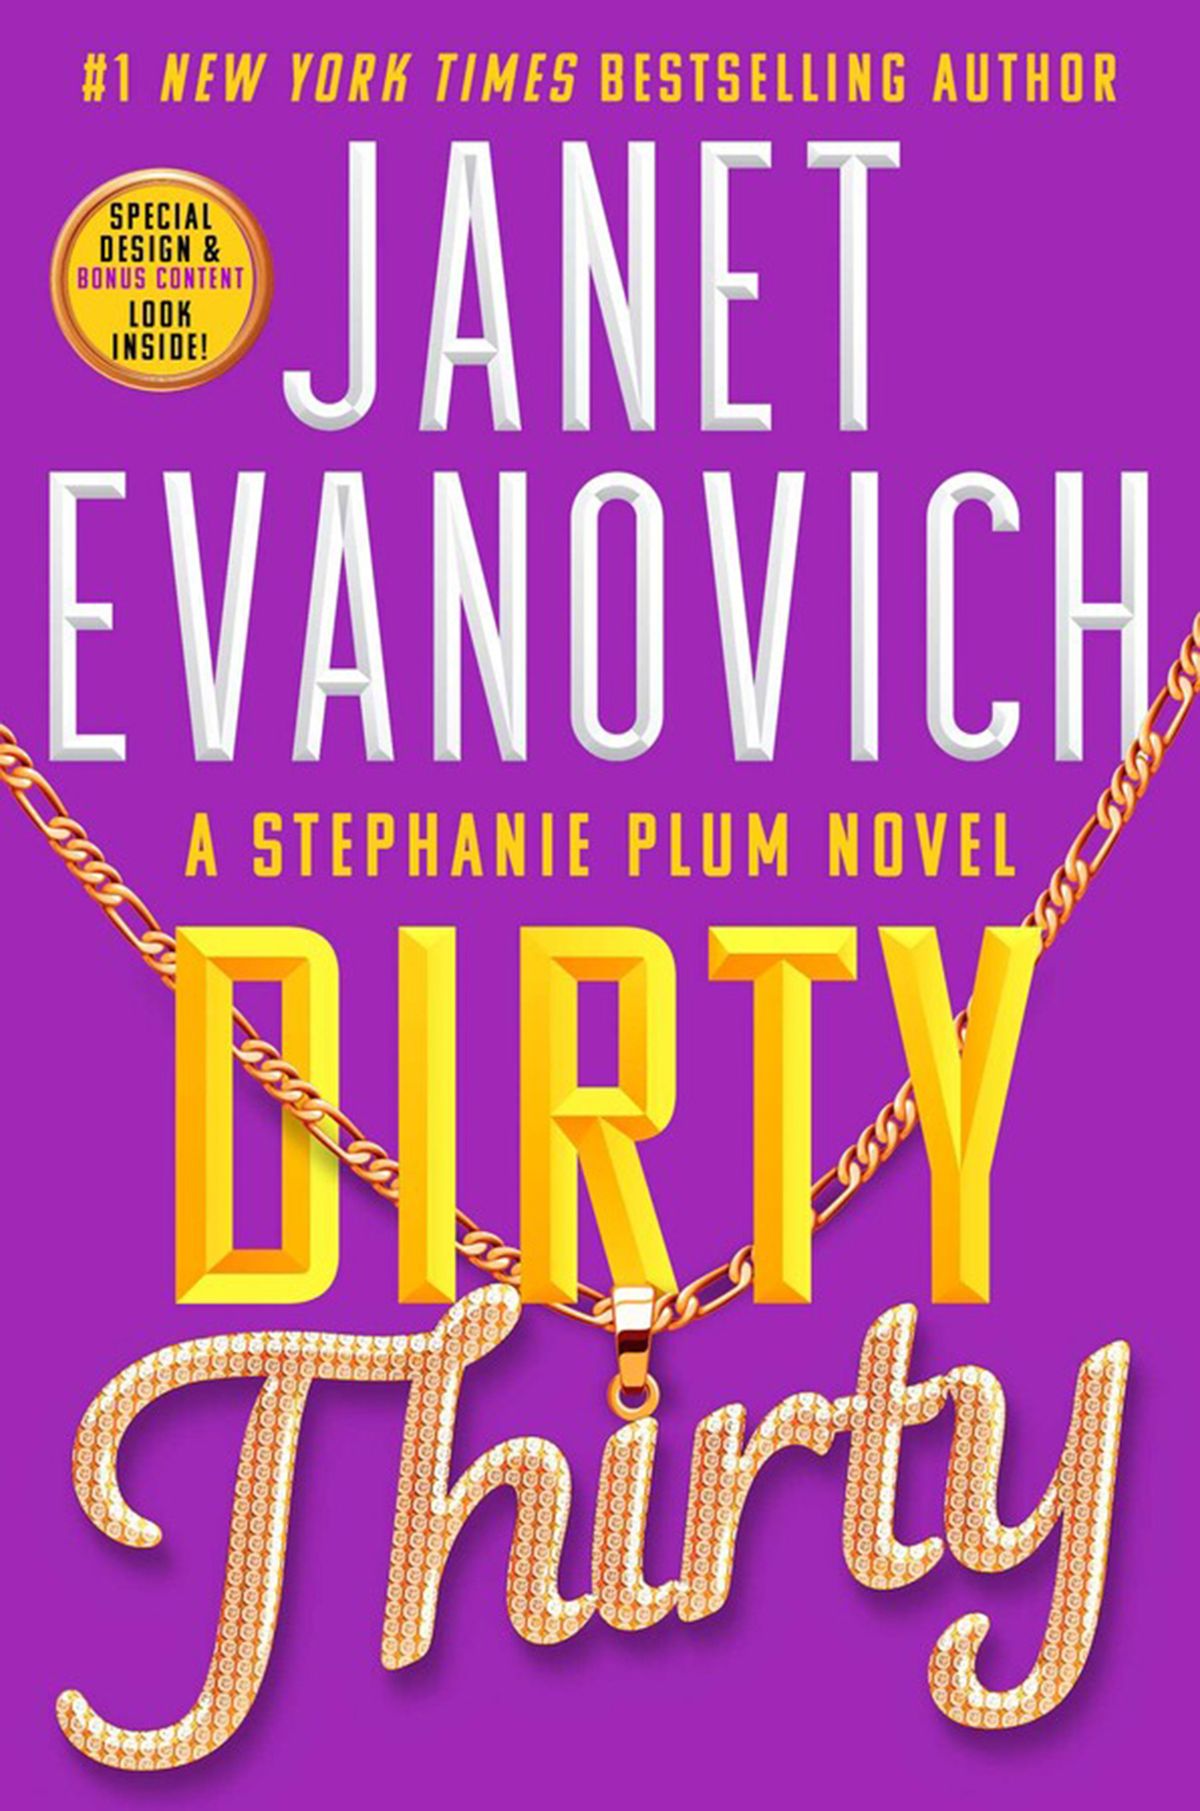 "Dirty Thirty" by Janet Evanovich. (Simon & Schuster/TNS)  (Simon & Schuster/Simon & Schuster/TNS)